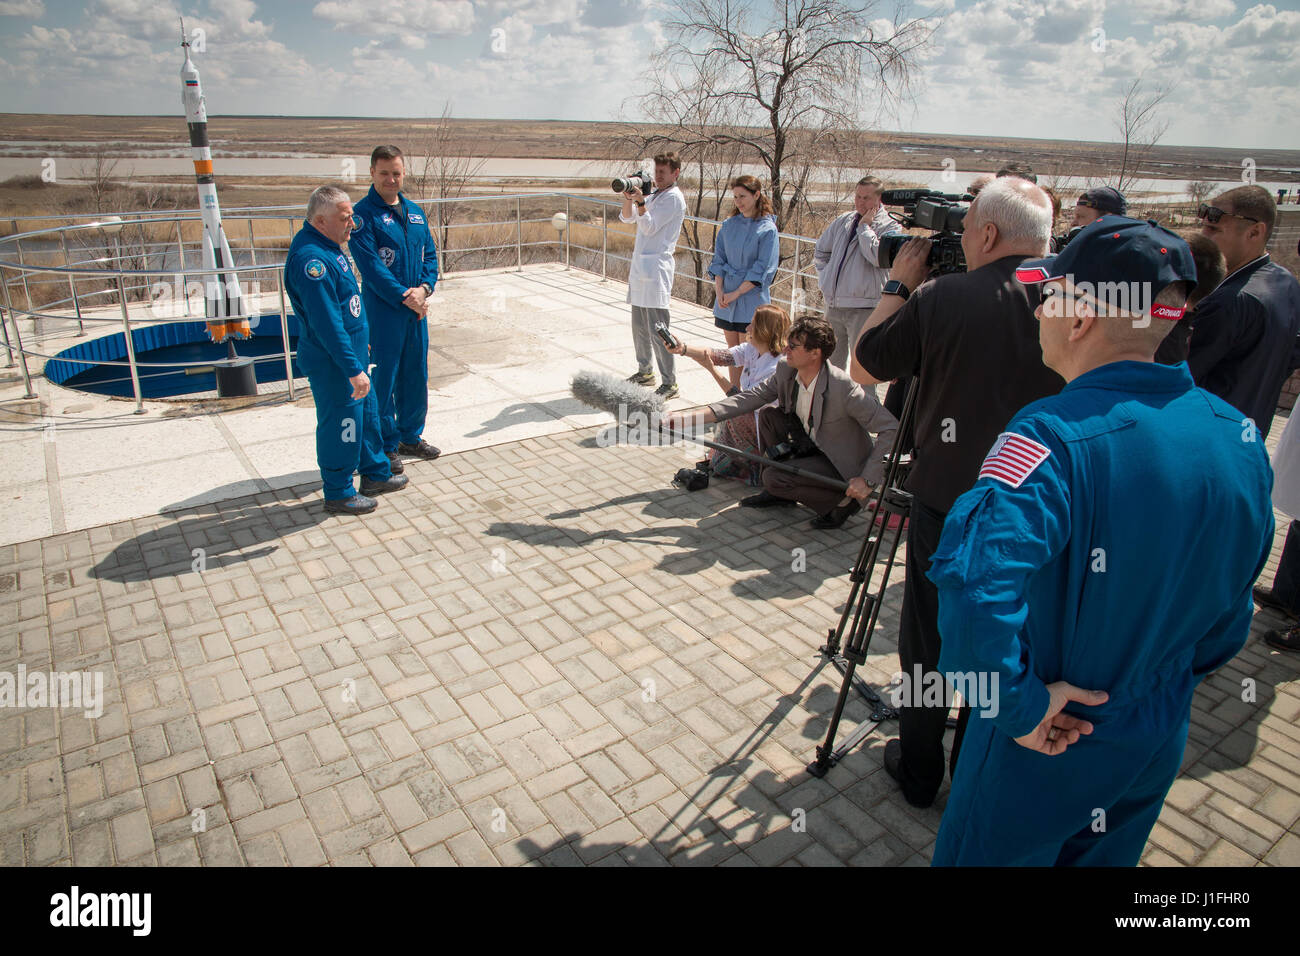 NASA International Space Station Expedition 51 Soyuz MS-04 mission prime crew members Russian cosmonaut Fyodor Yurchikhin of Roscosmos (left) and American astronaut Jack Fischer answer questions from the media during pre-launch activities at the Cosmonaut Hotel April 13, 2017 in Baikonur, Kazakhstan.       (photo by Victor Zelentsov /NASA   via Planetpix) Stock Photo